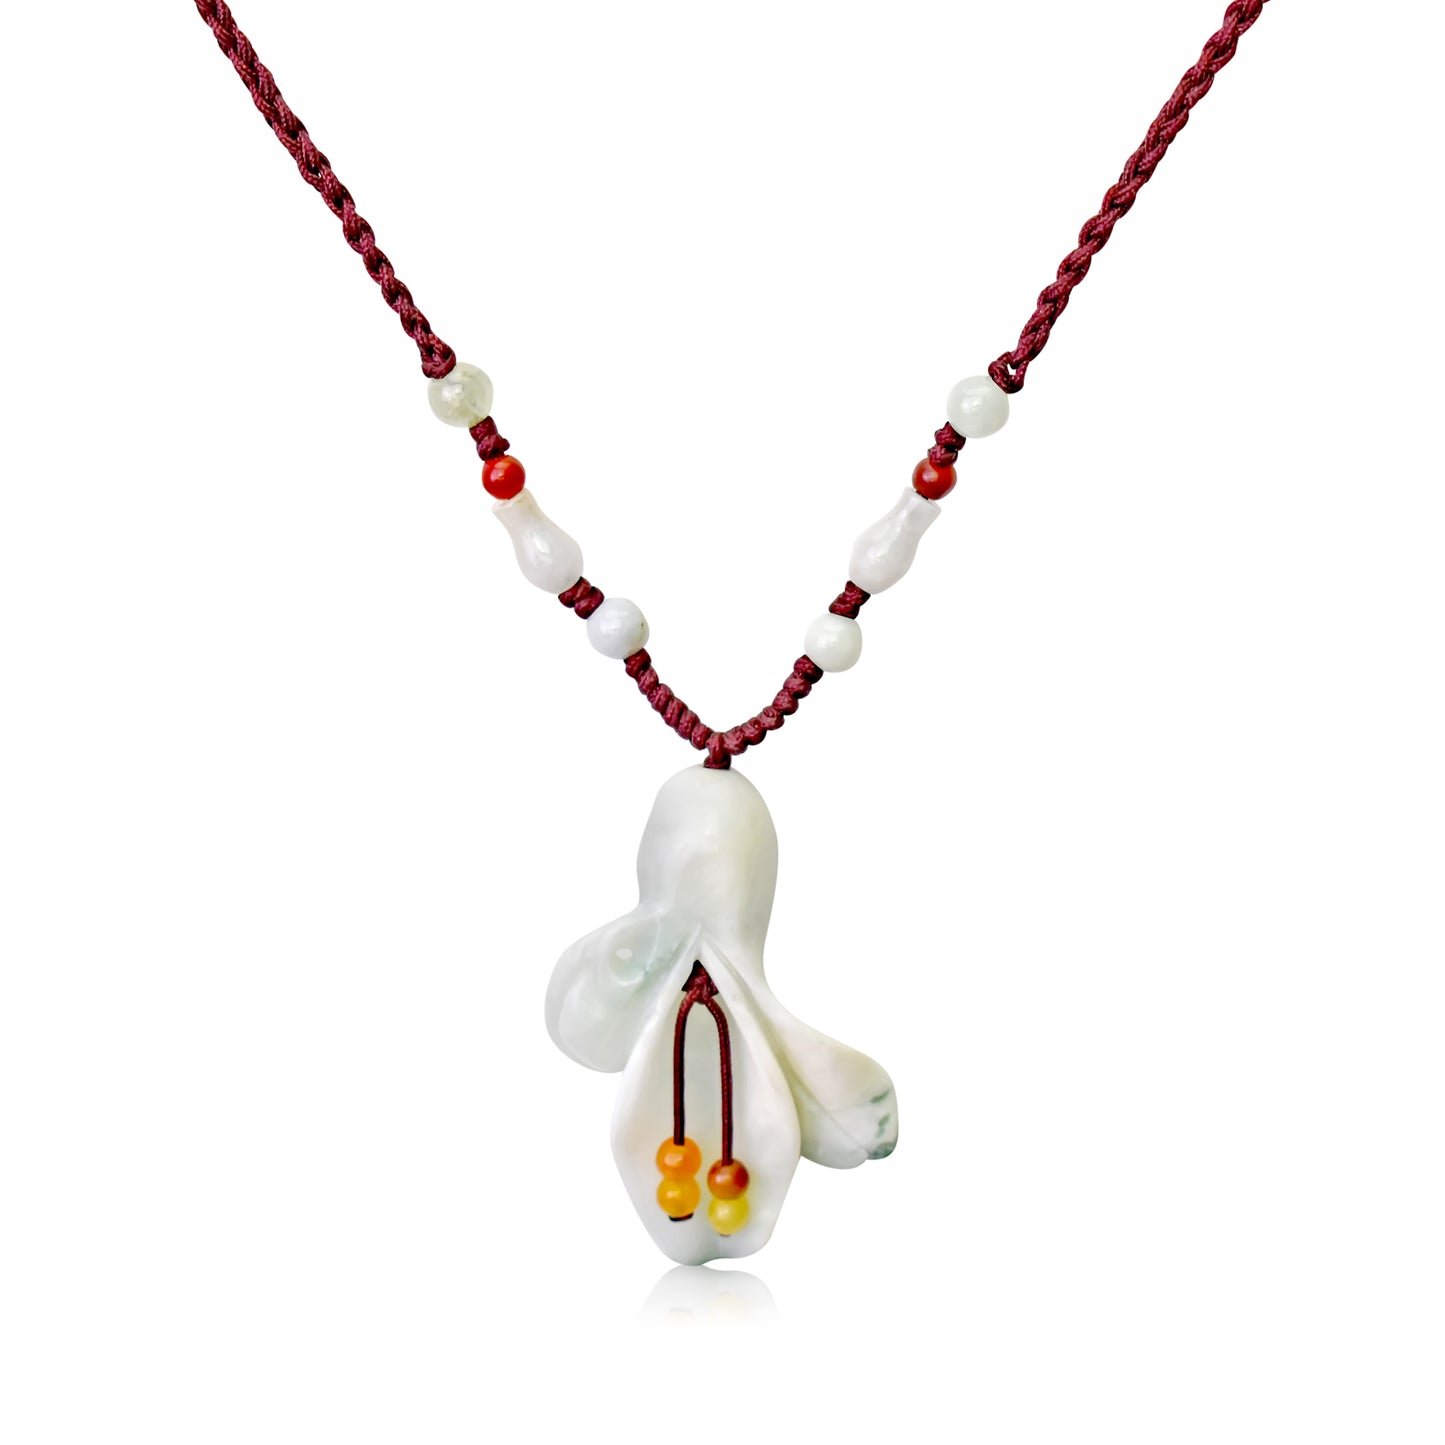 Add Beauty and Charm with the Calla Lily Necklace made with Brown Cord